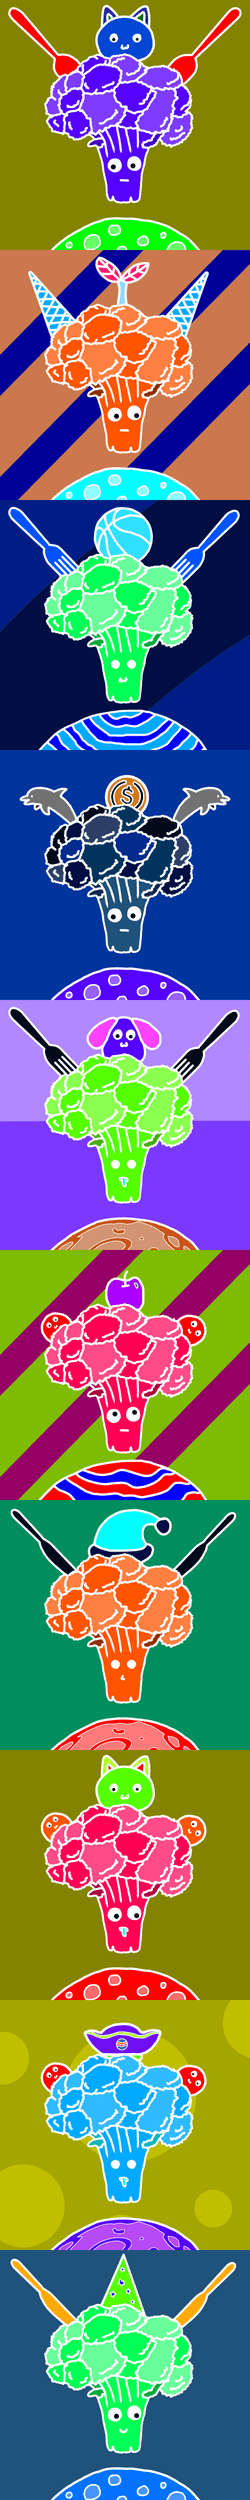 Mutated Broccoli Club collection image